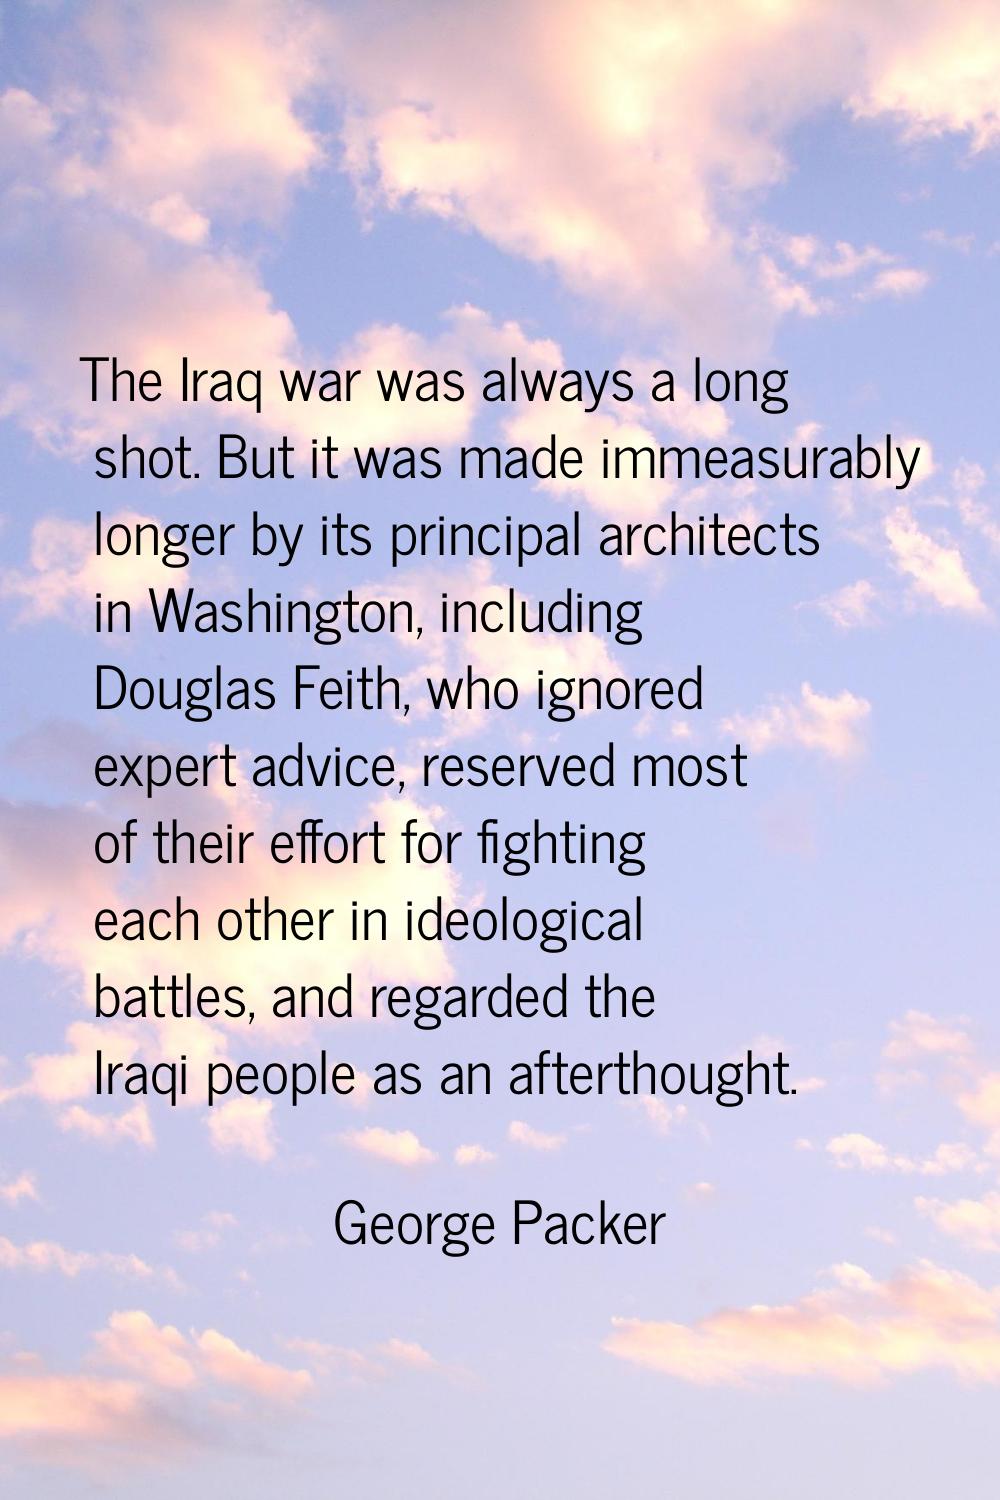 The Iraq war was always a long shot. But it was made immeasurably longer by its principal architect